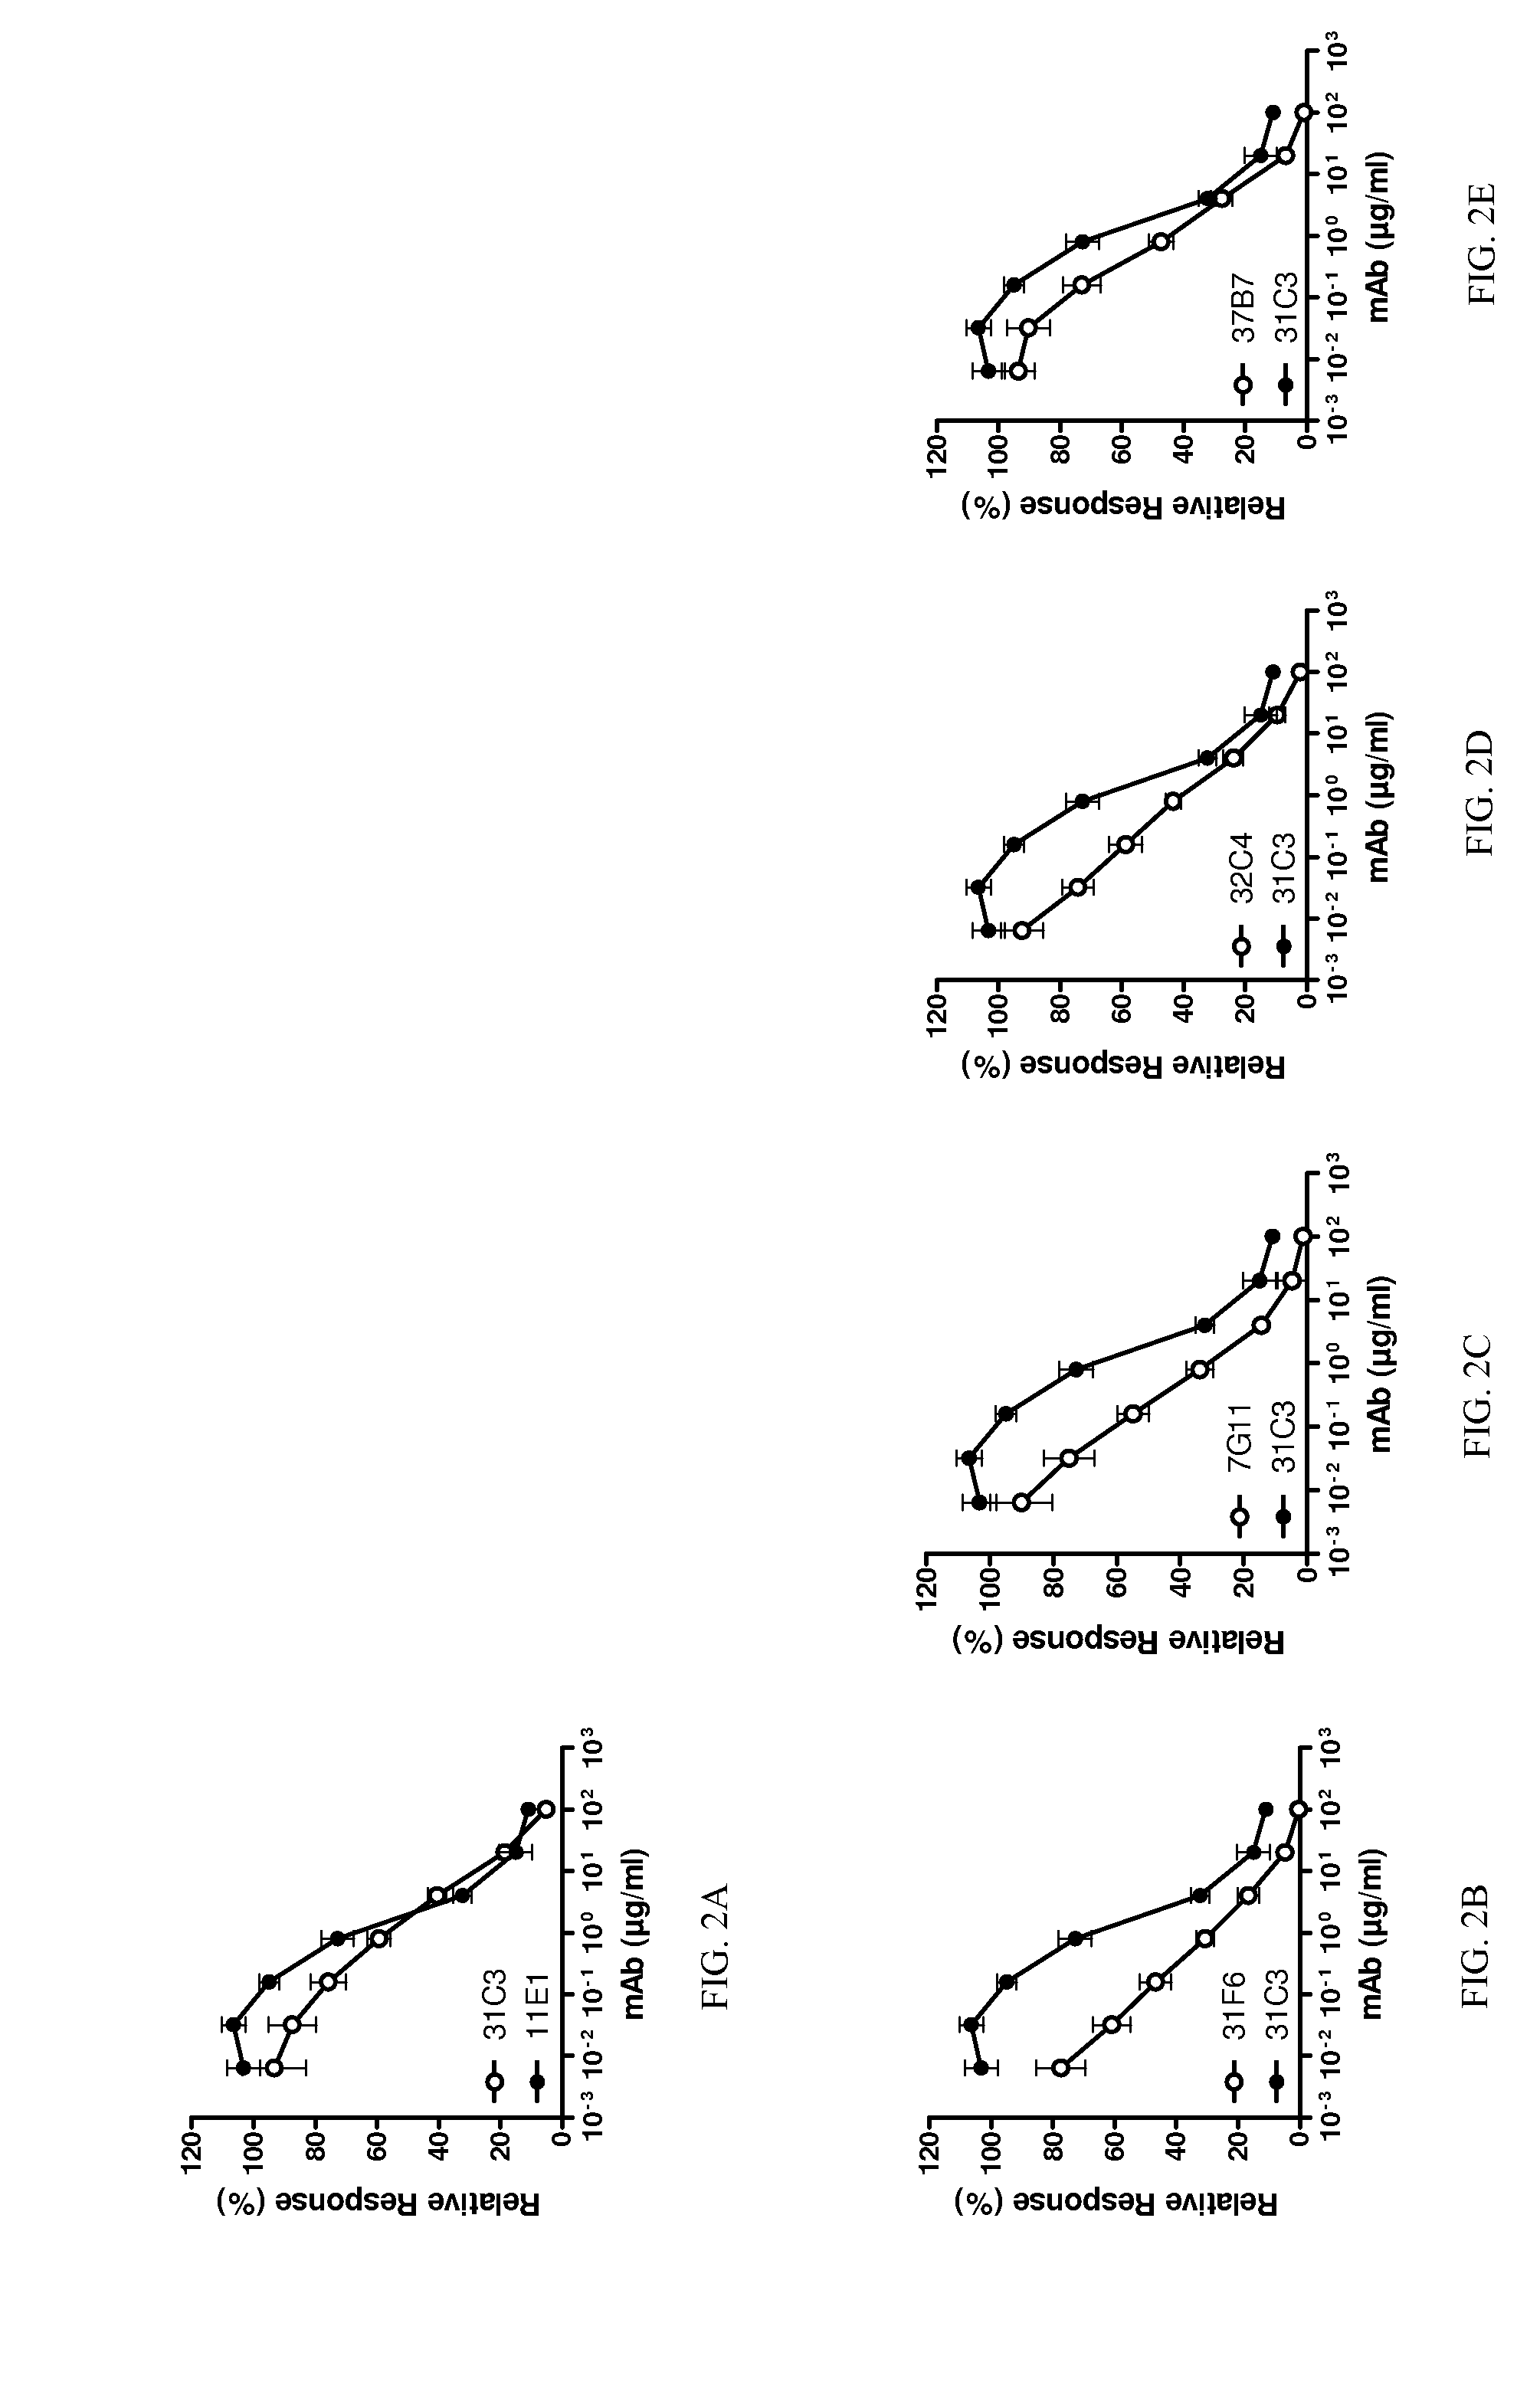 Tlr3 binding agents